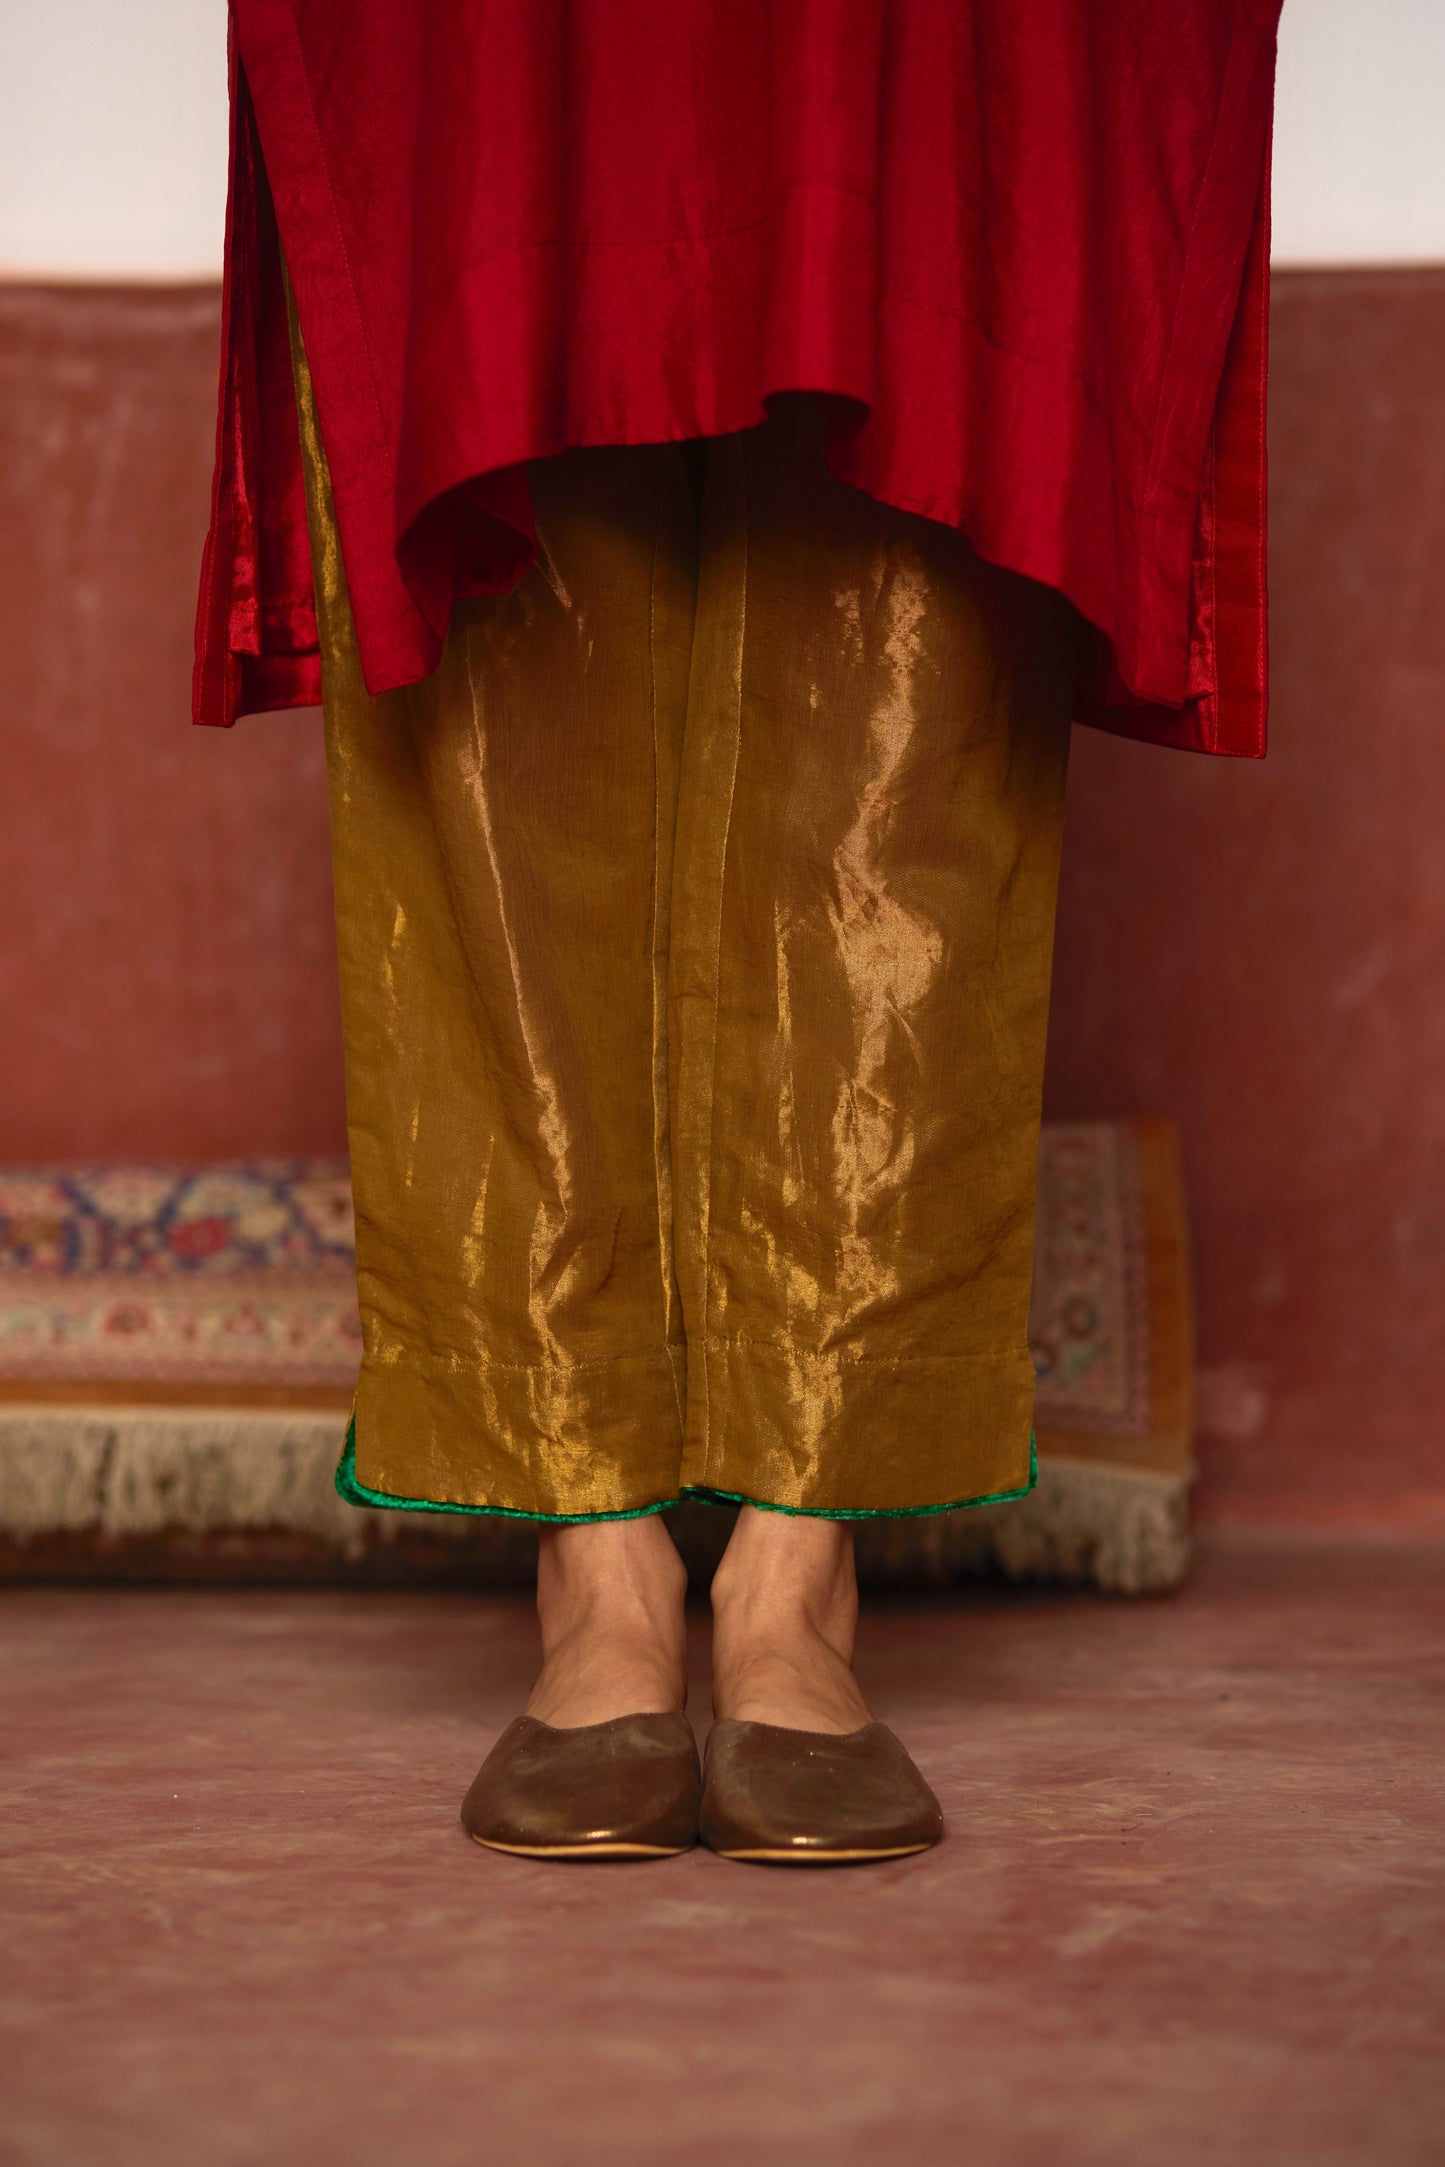 Jhabla Kurta in Red Silk with Gold Tissue Pant